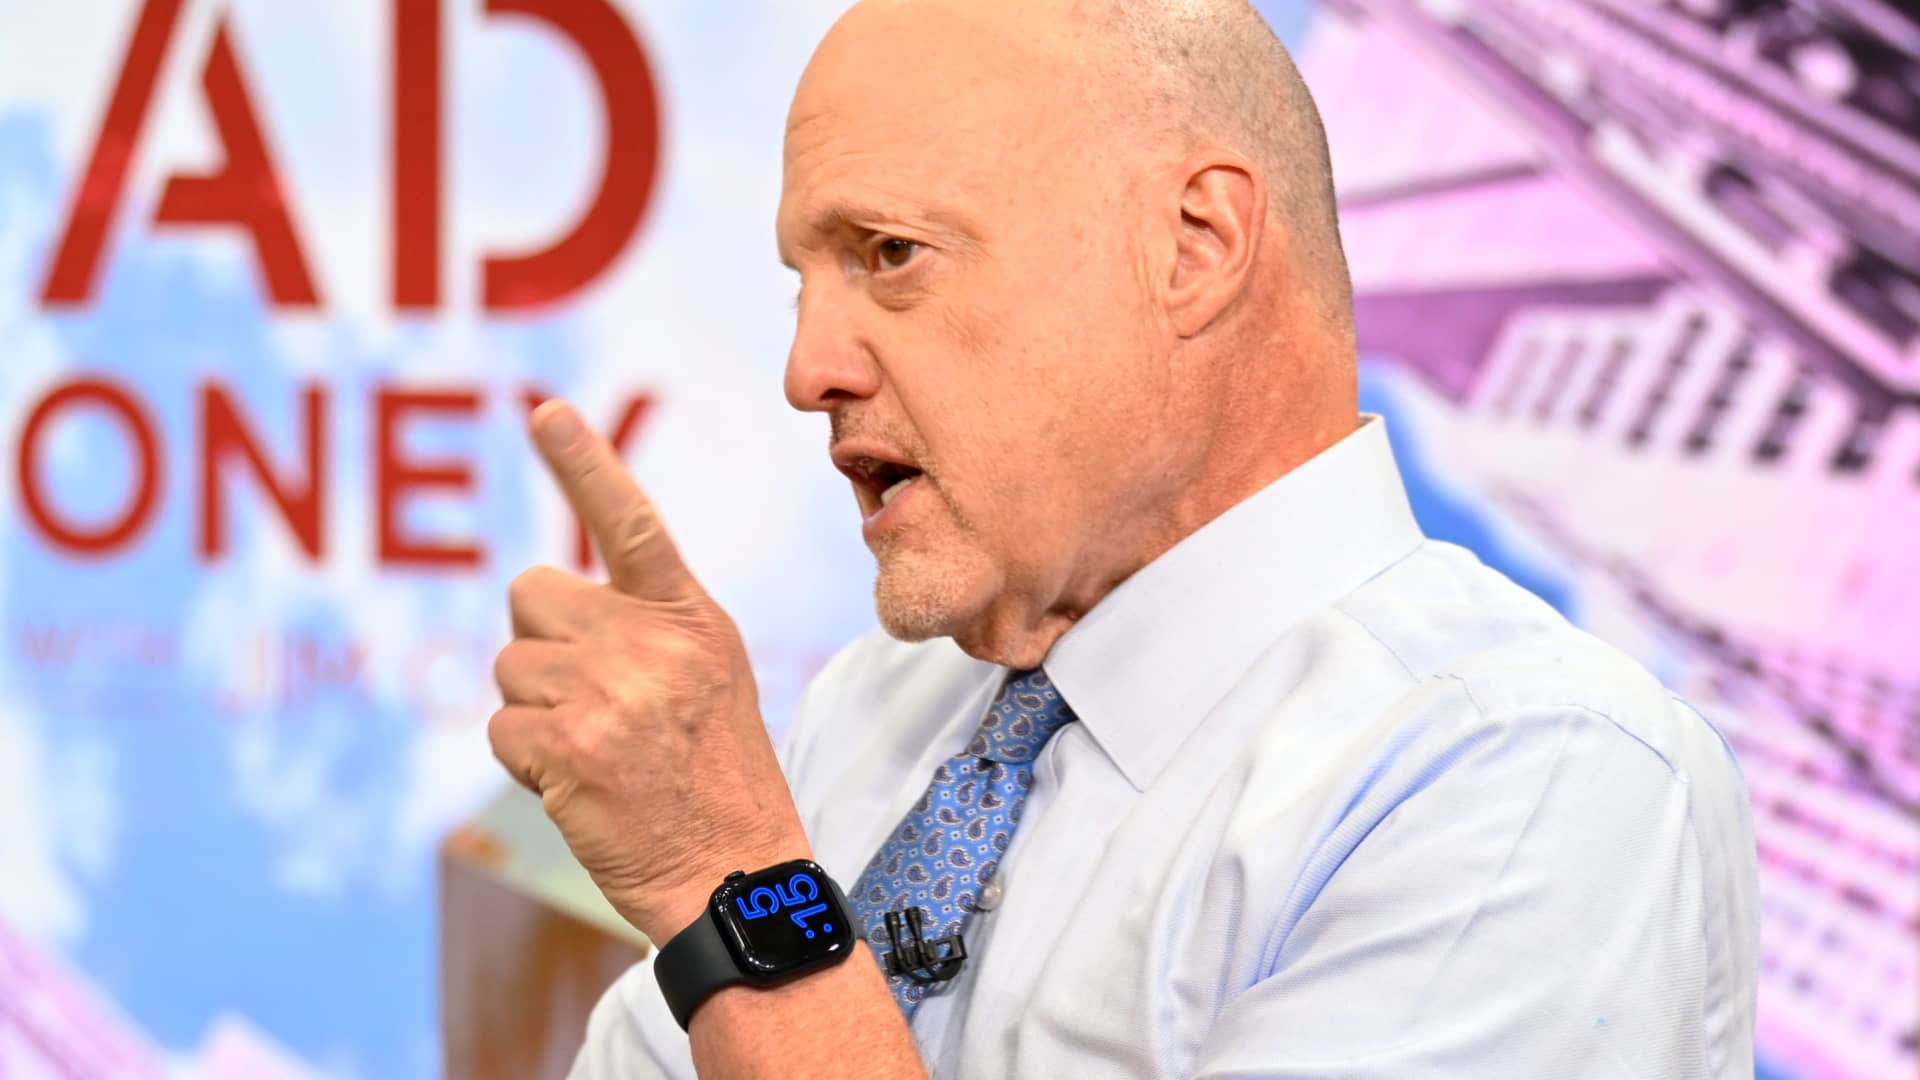 Cramer’s week ahead: Take advantage of the bull market by selling some shares